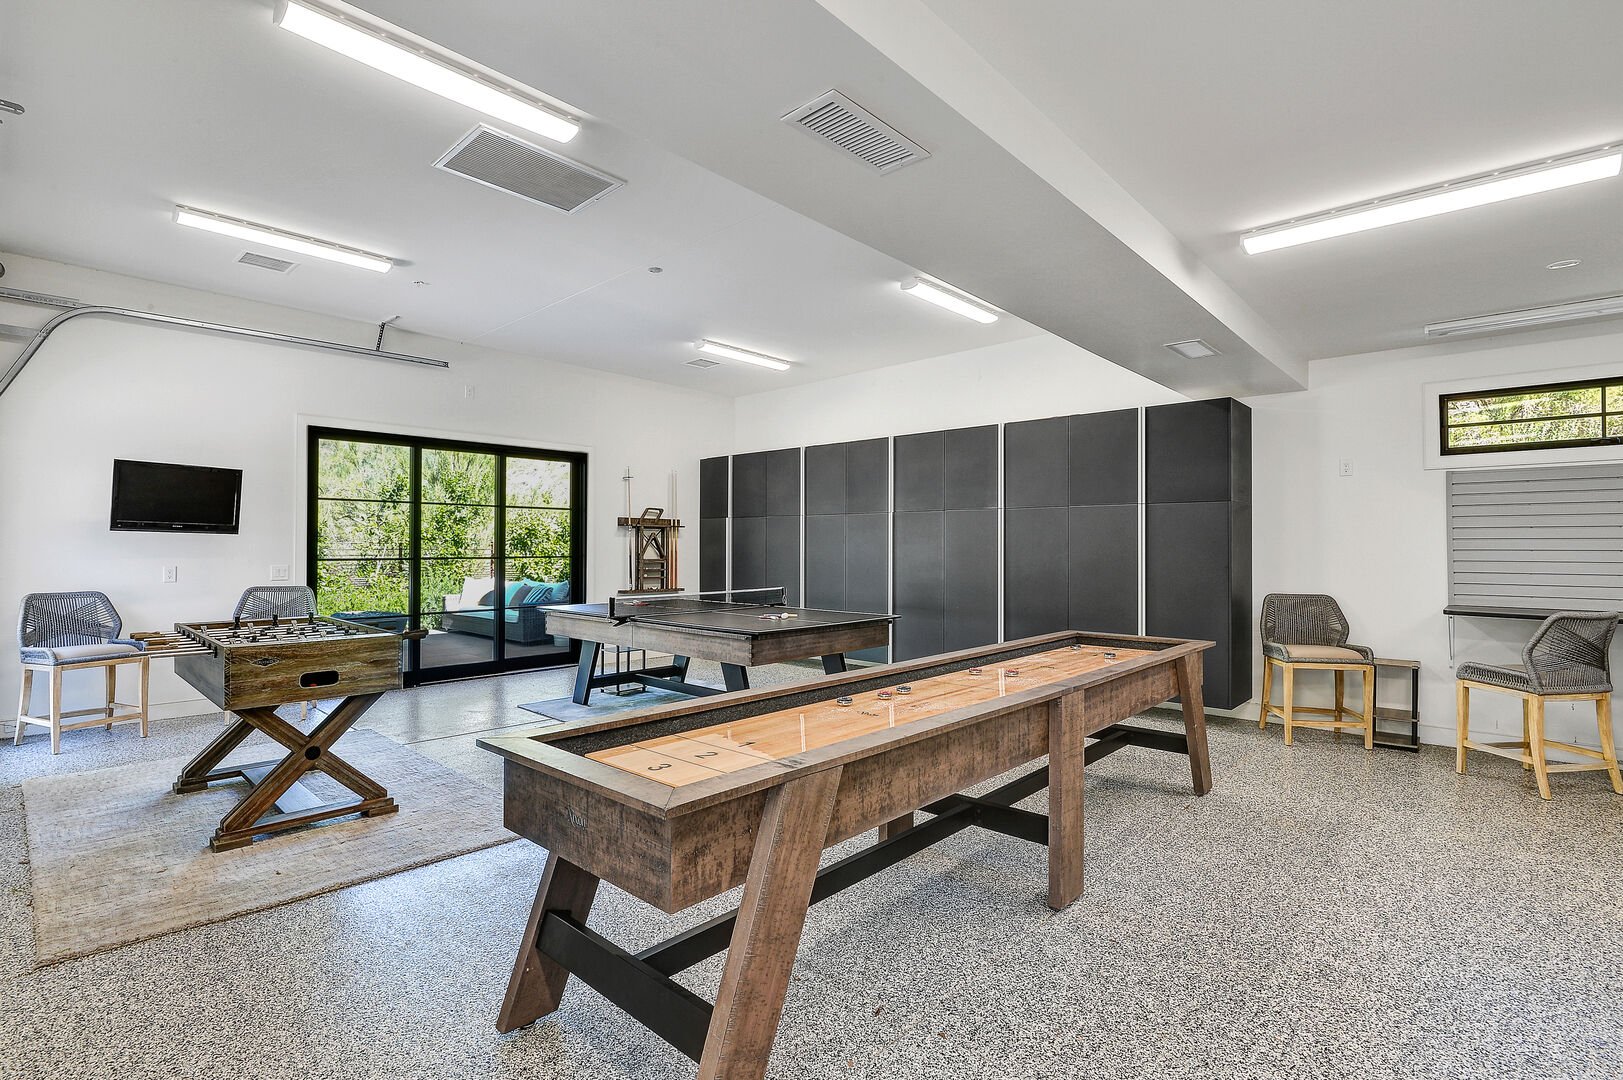 The garage, kept at a comfortable temperature, is also a game room with shuffleboard, a pool table that turns into ping pong, and foosball.